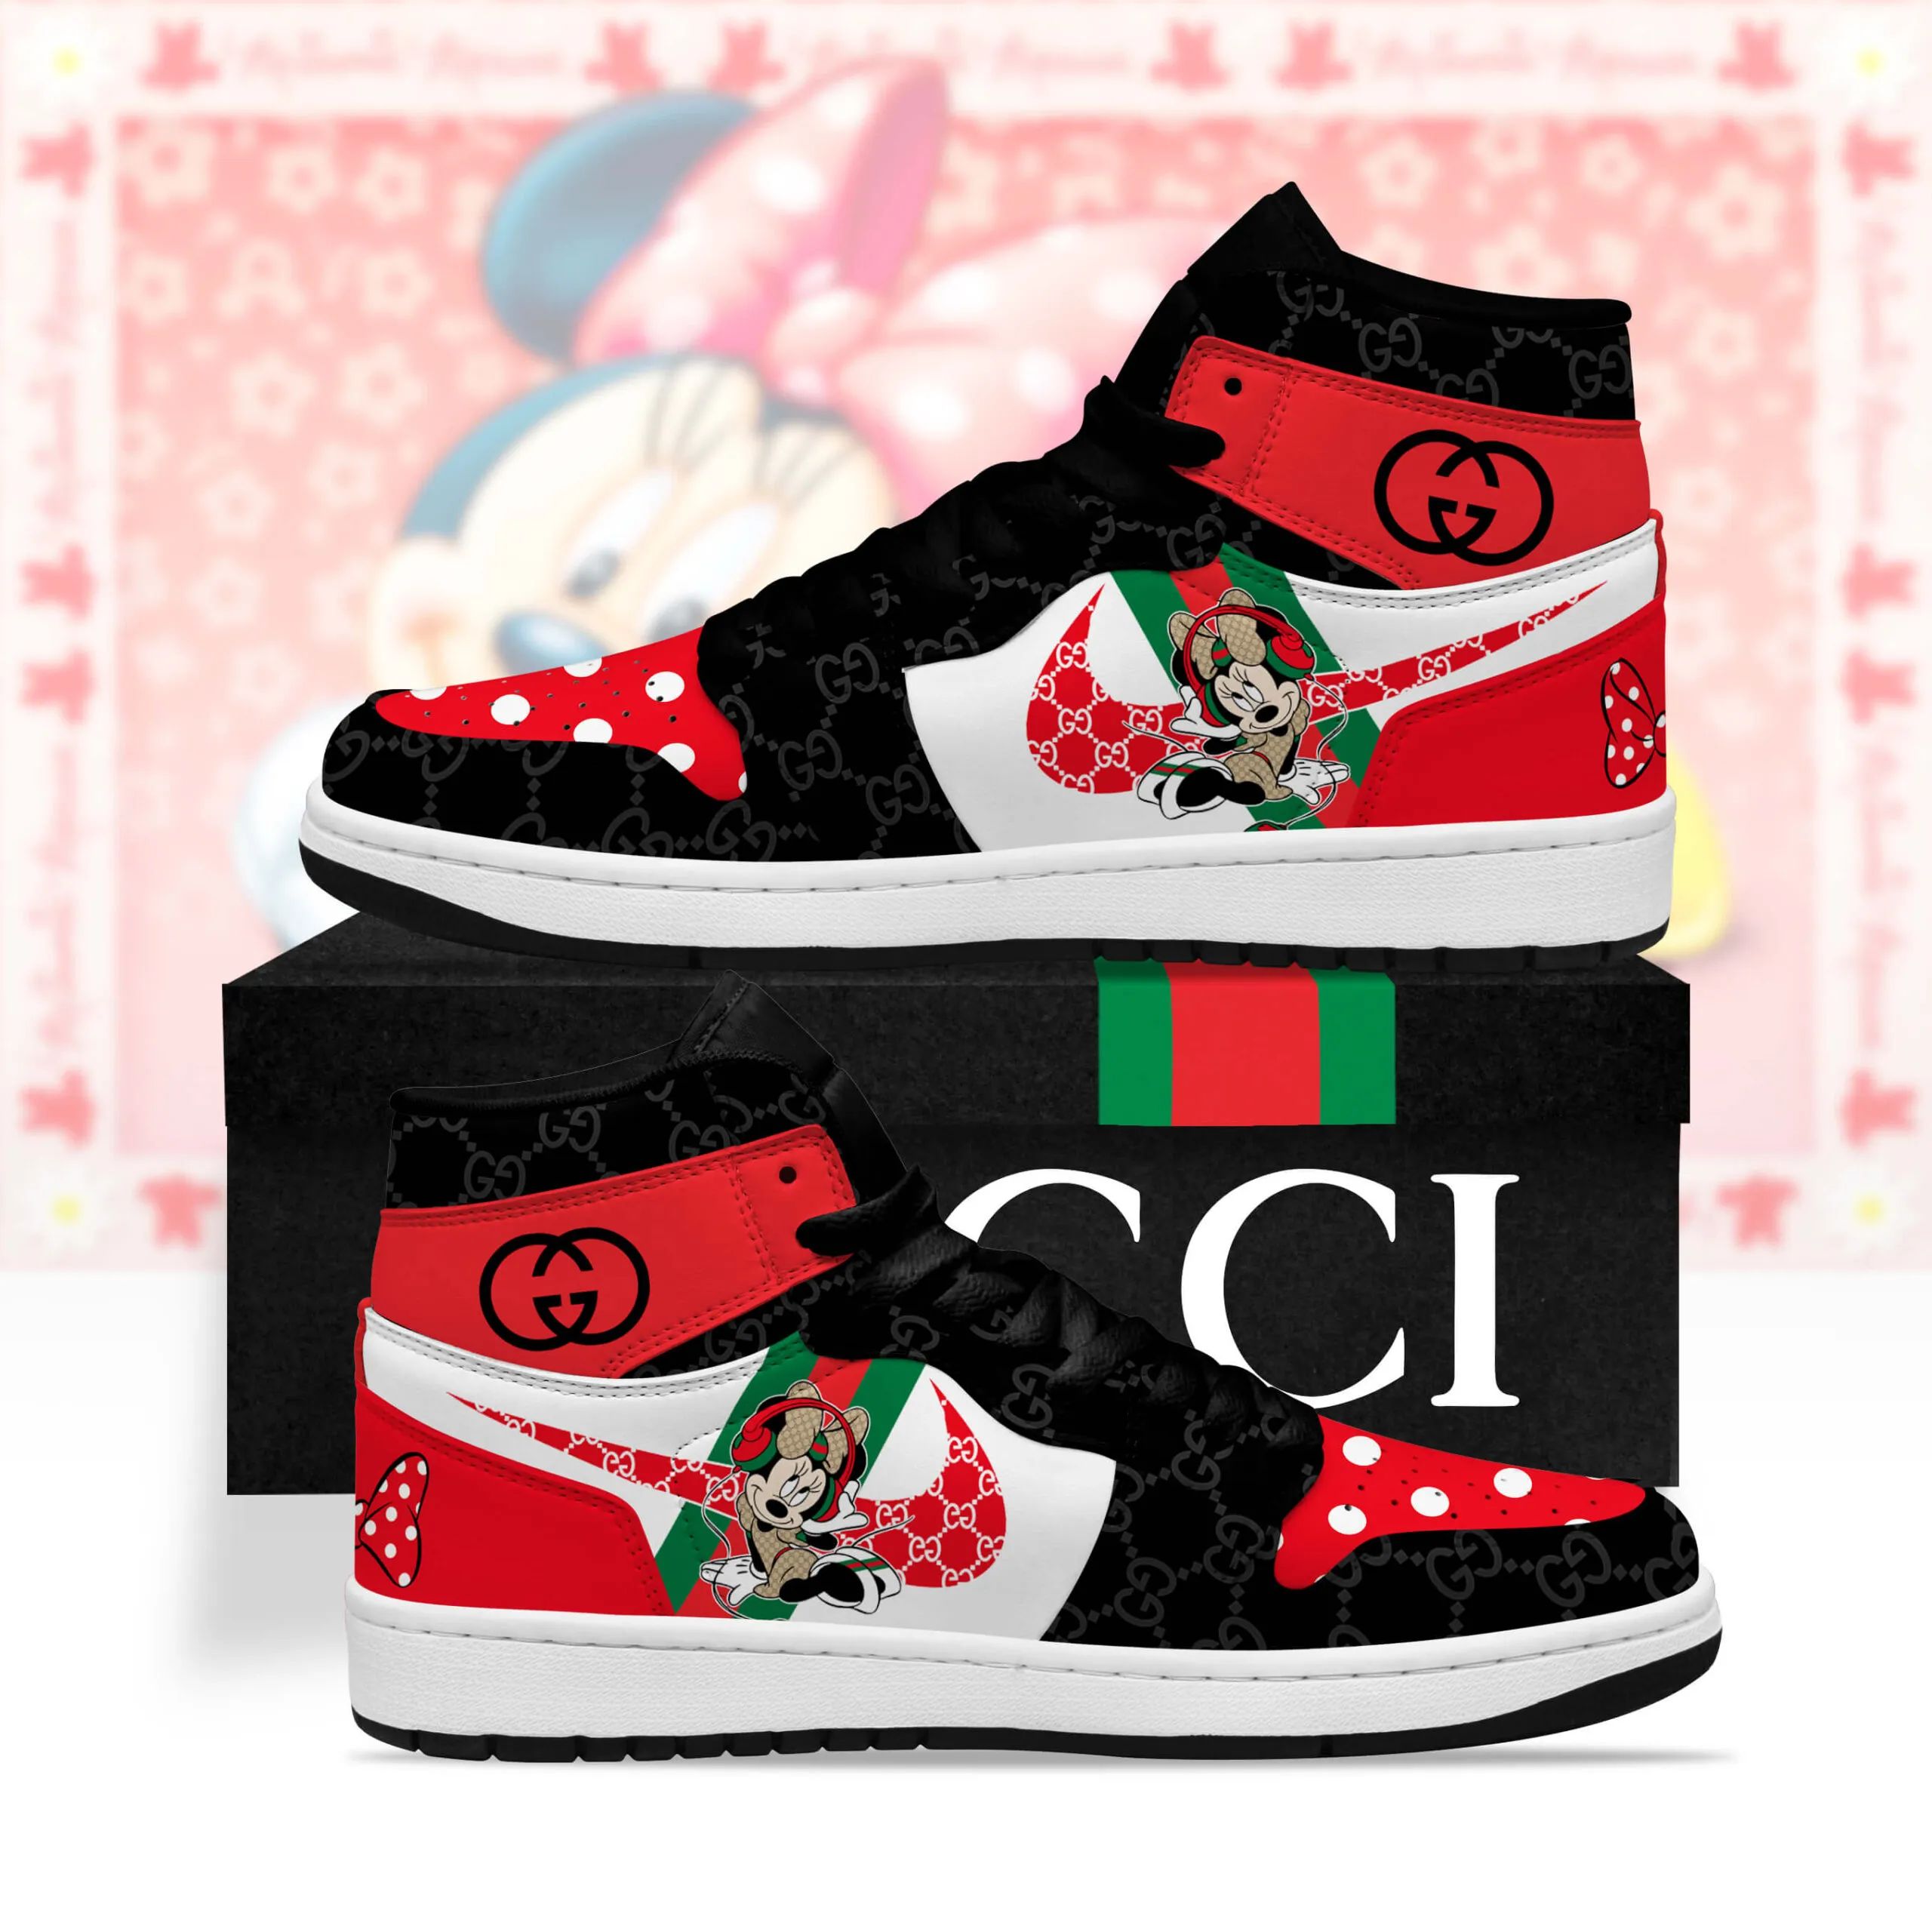 Gucci Mickey Mouse High Air Jordan Luxury Sneakers Fashion Brand Shoes